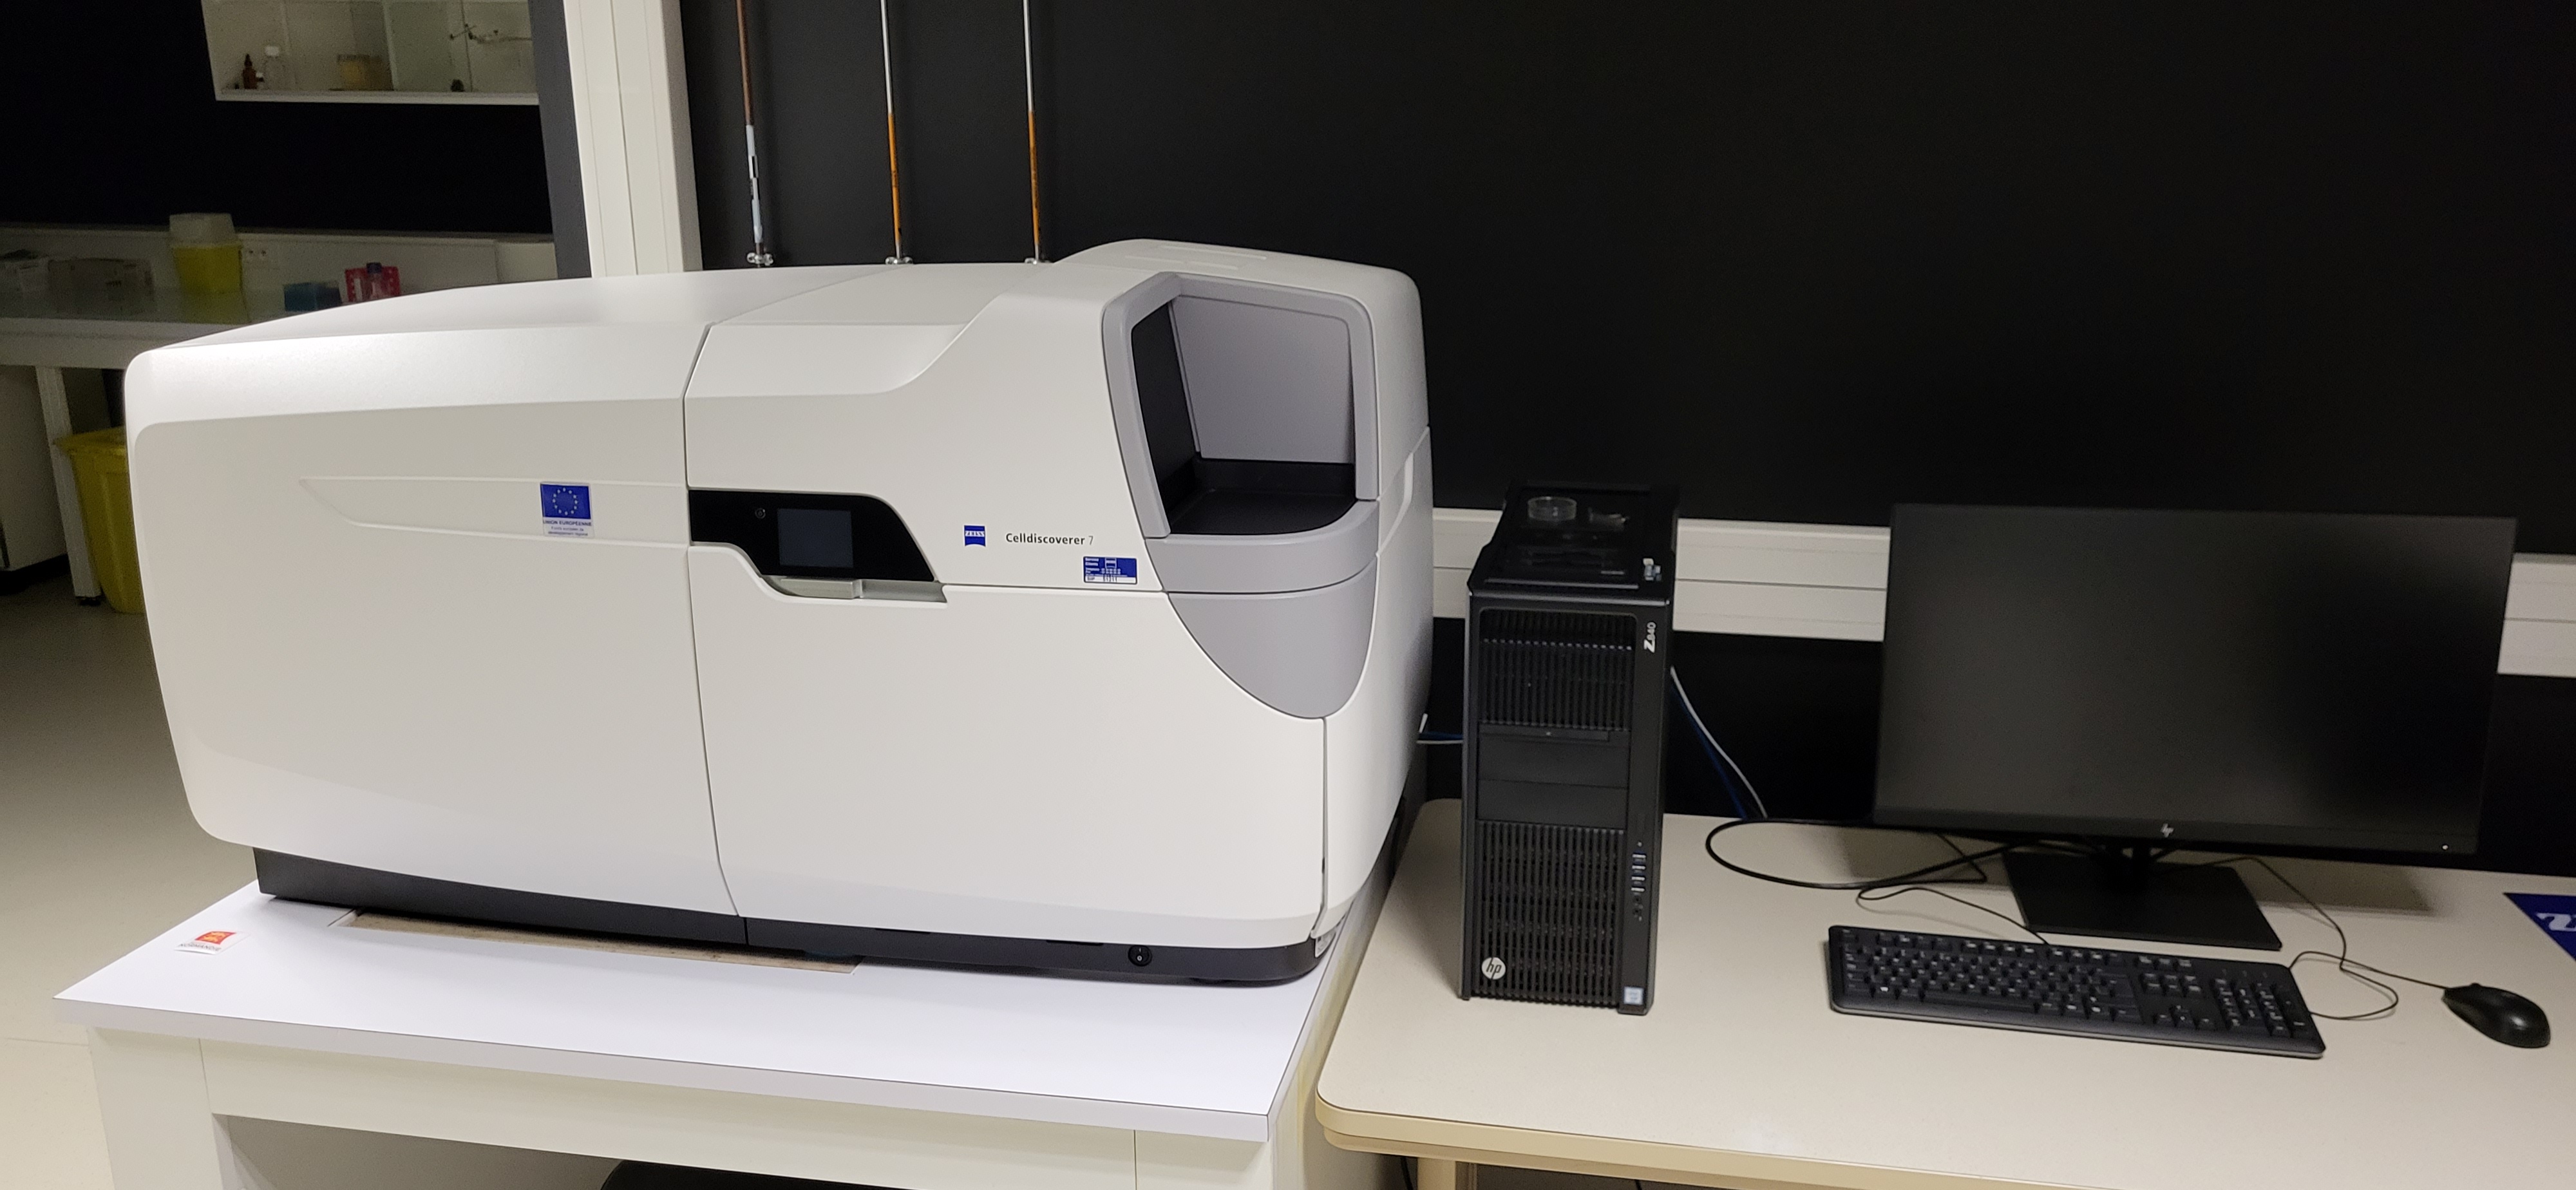 Zeiss Cell Discoverer 7